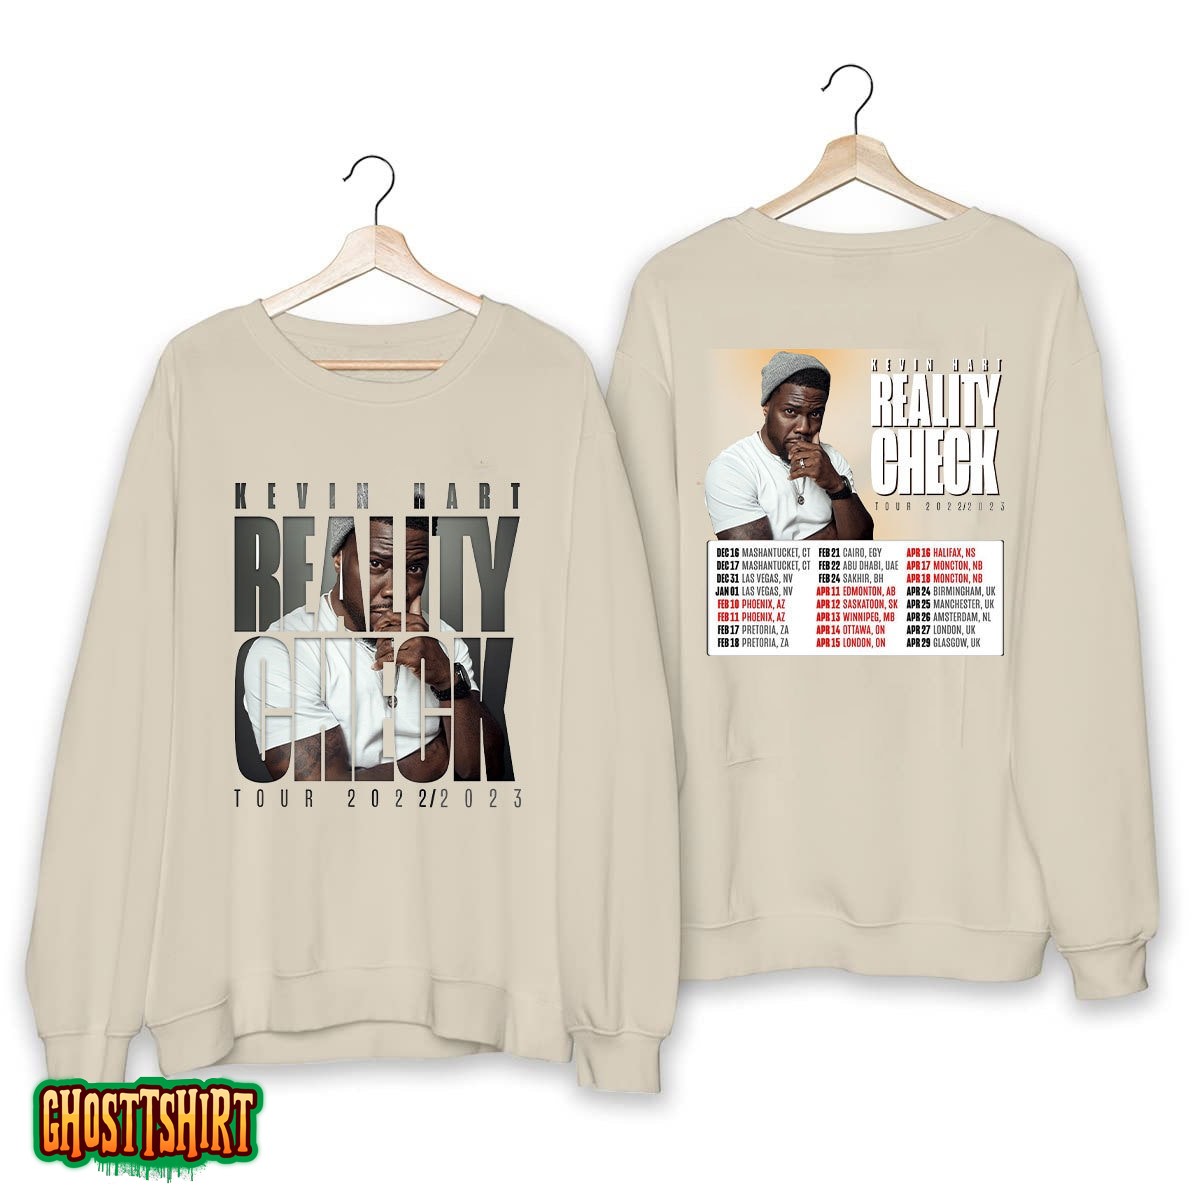 Reality Check Kevin Hart Hoodie